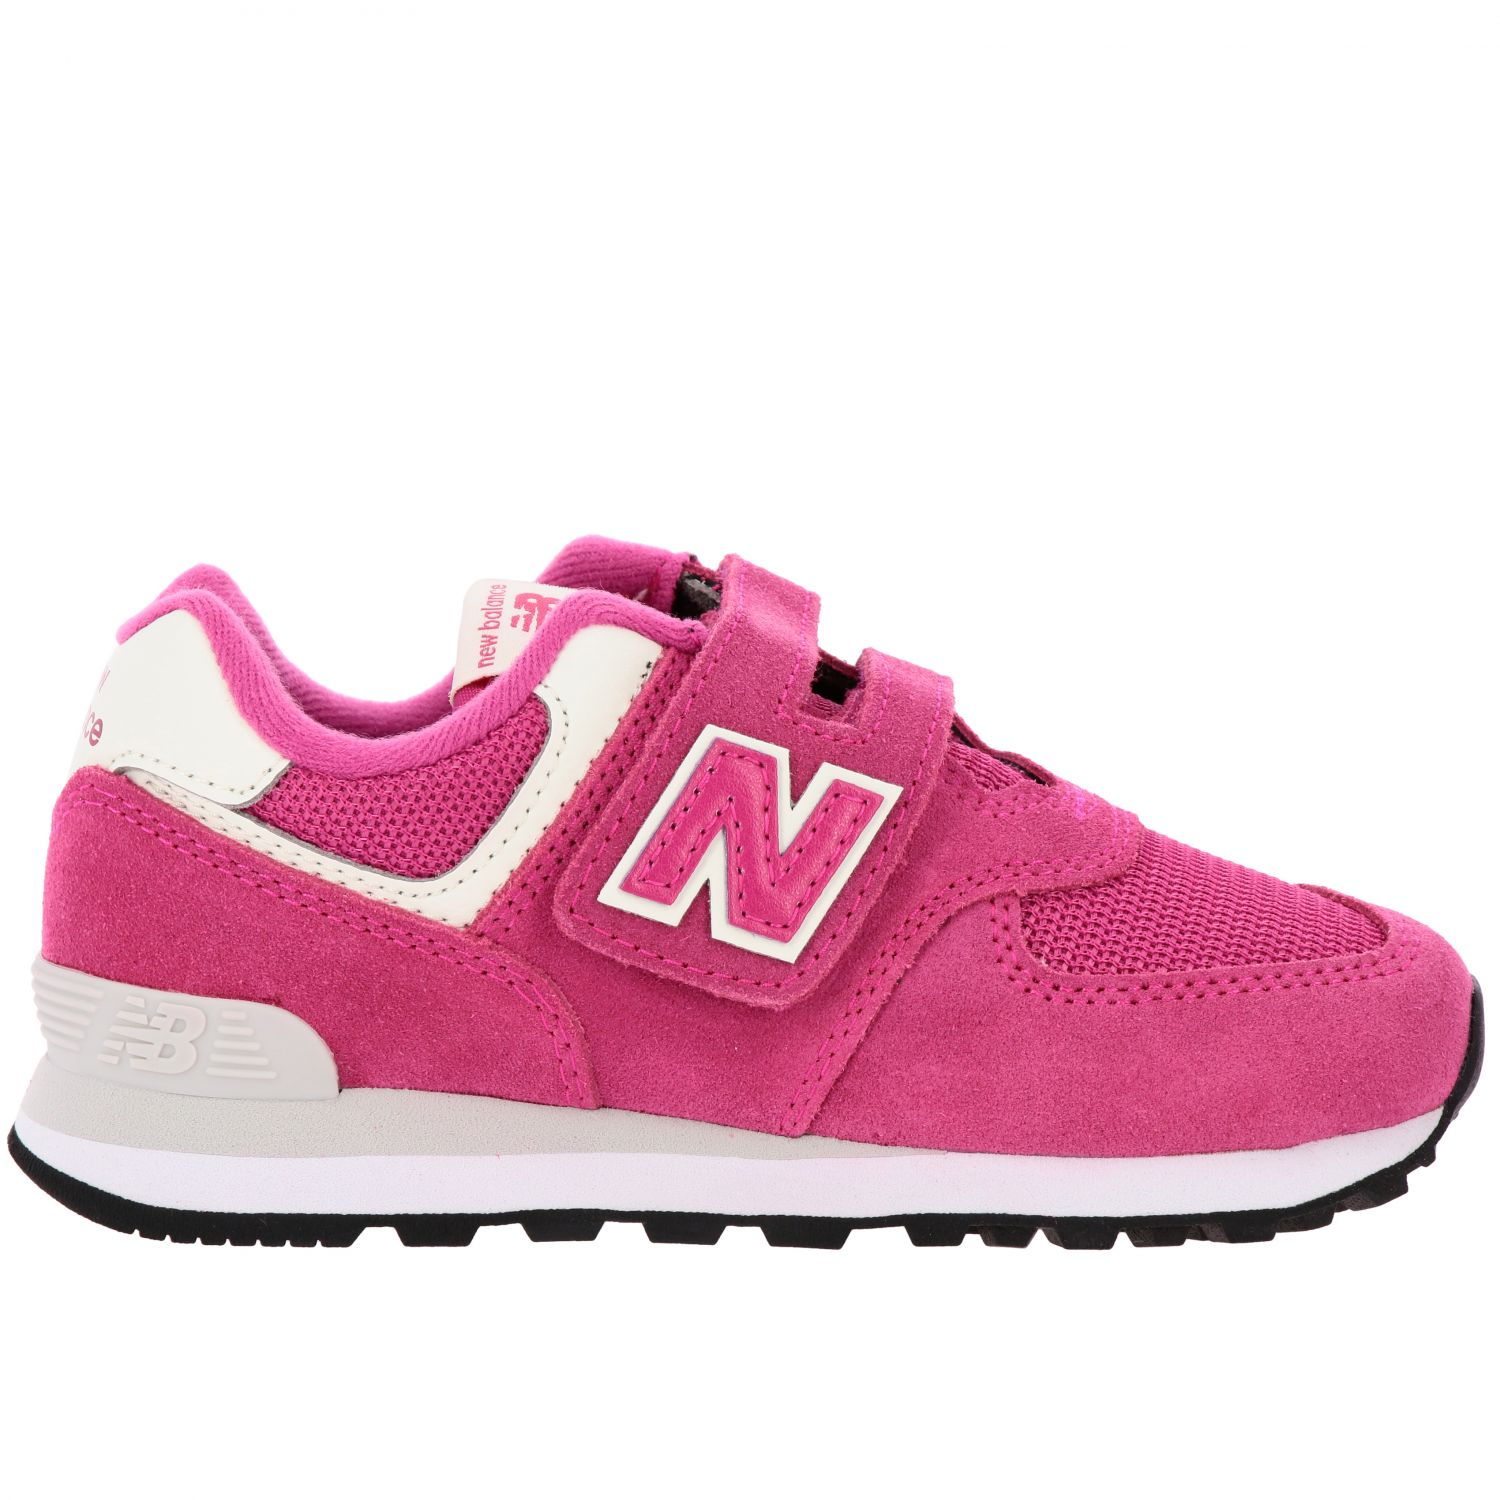 new balance rosa lucide